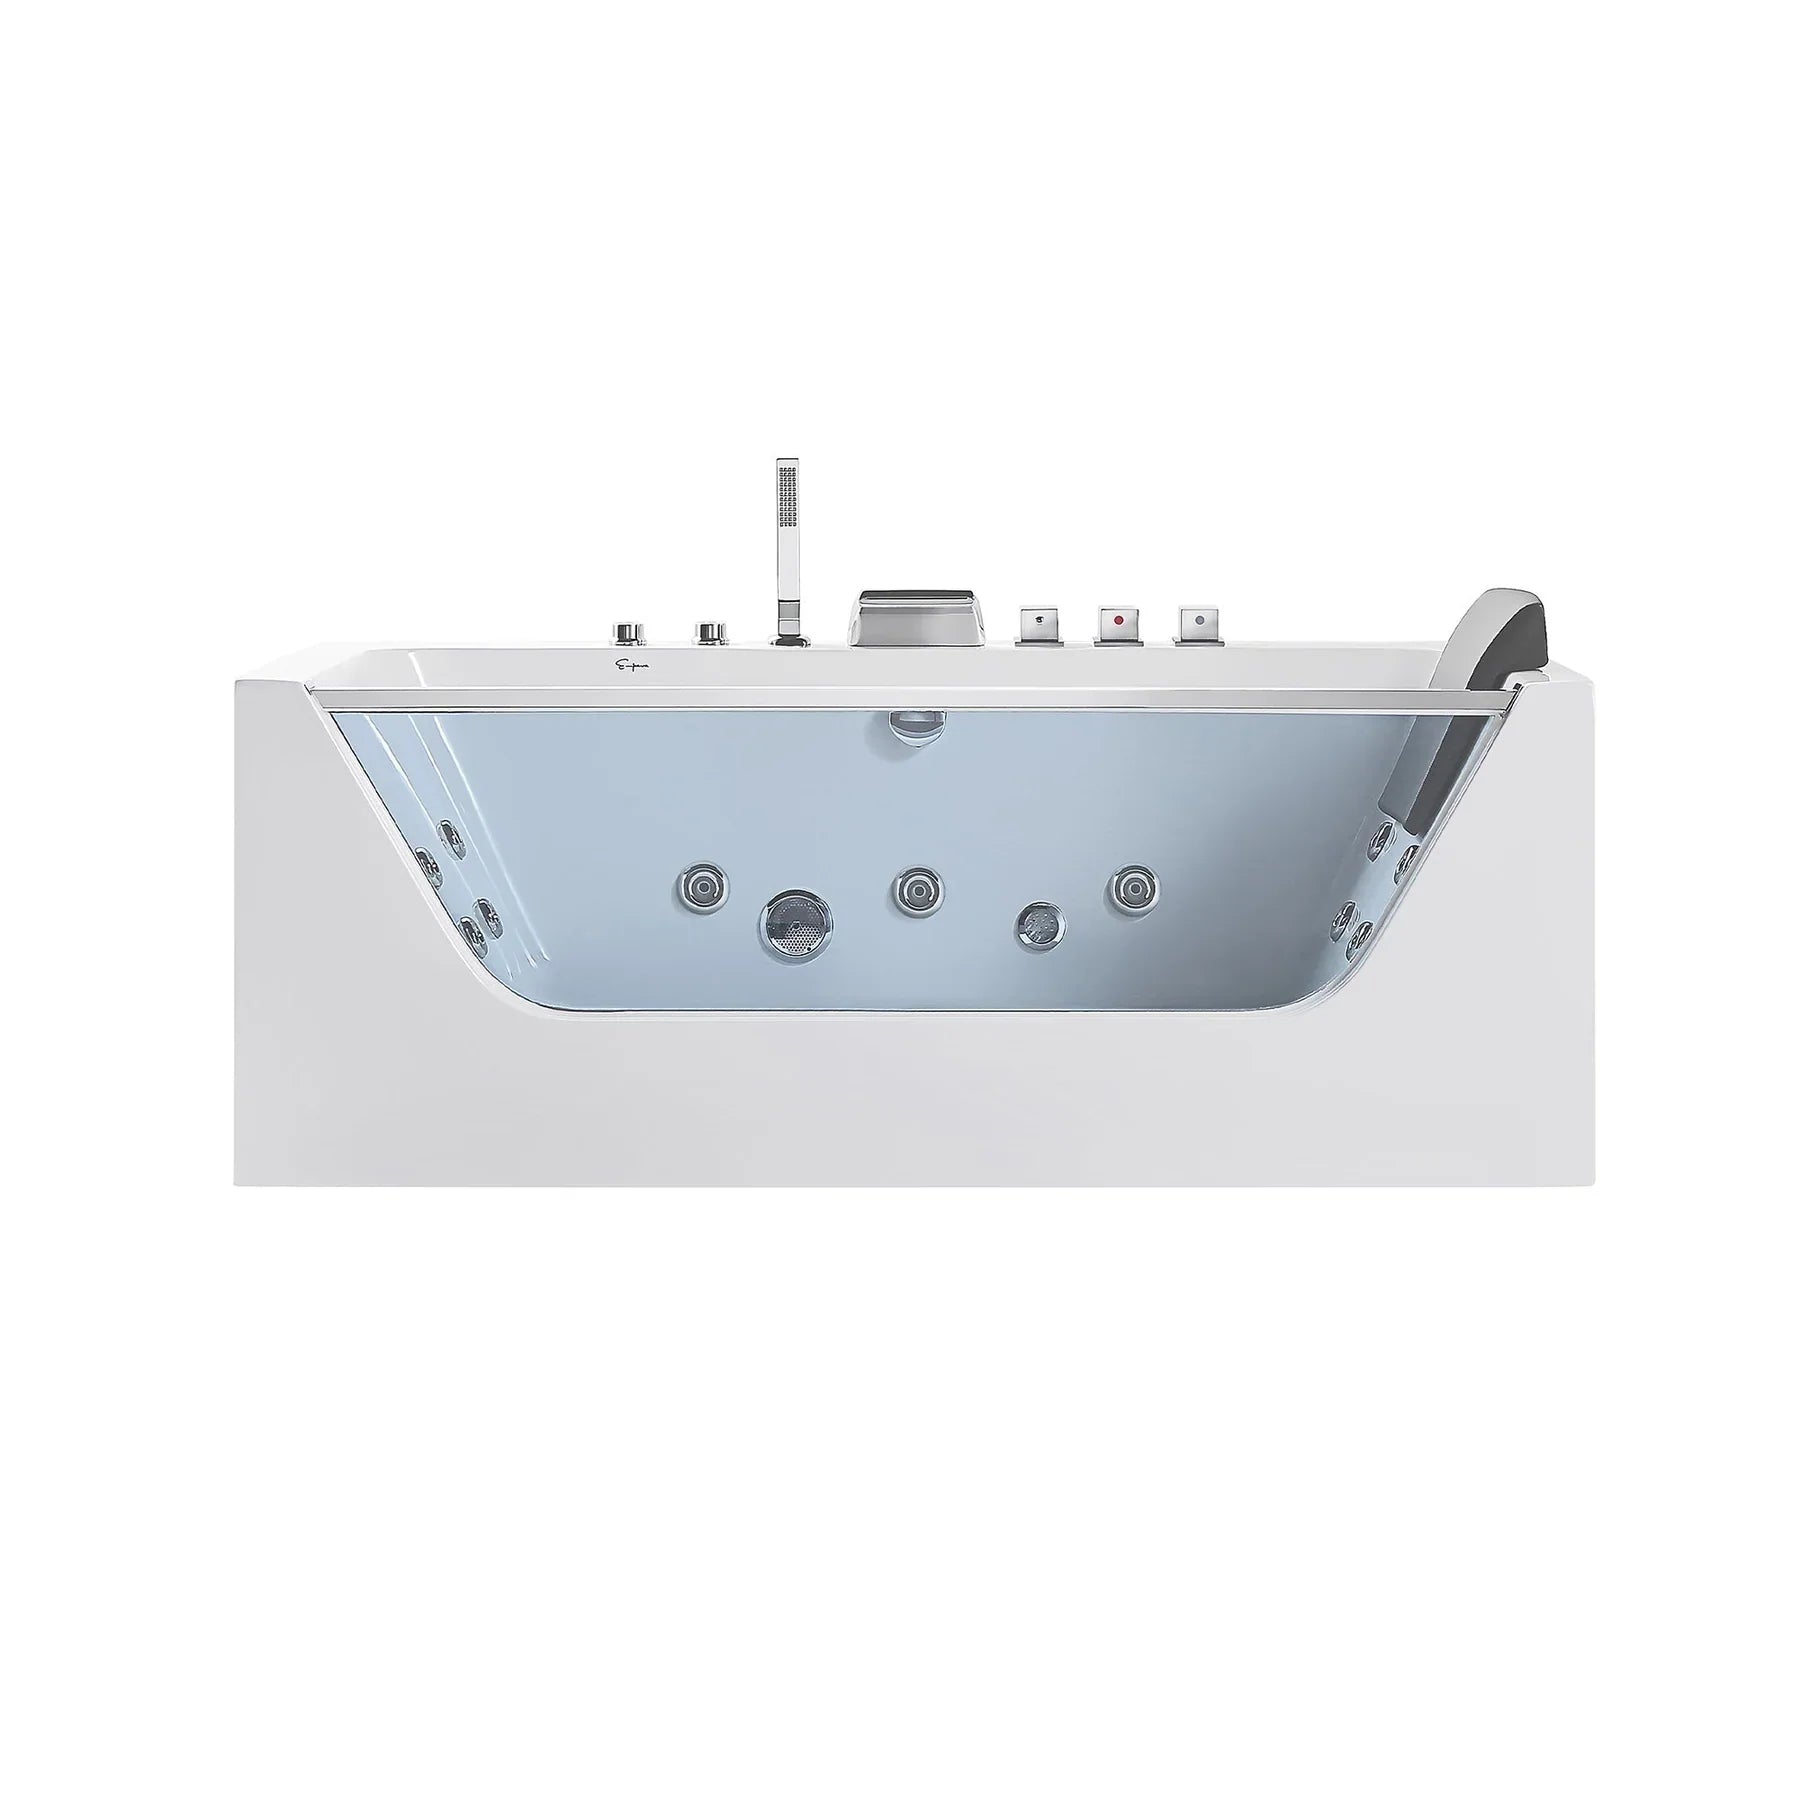 Empava 59 in. Waterfall Faucet Jetted Hydromassage Bathtub (59JT408LED)